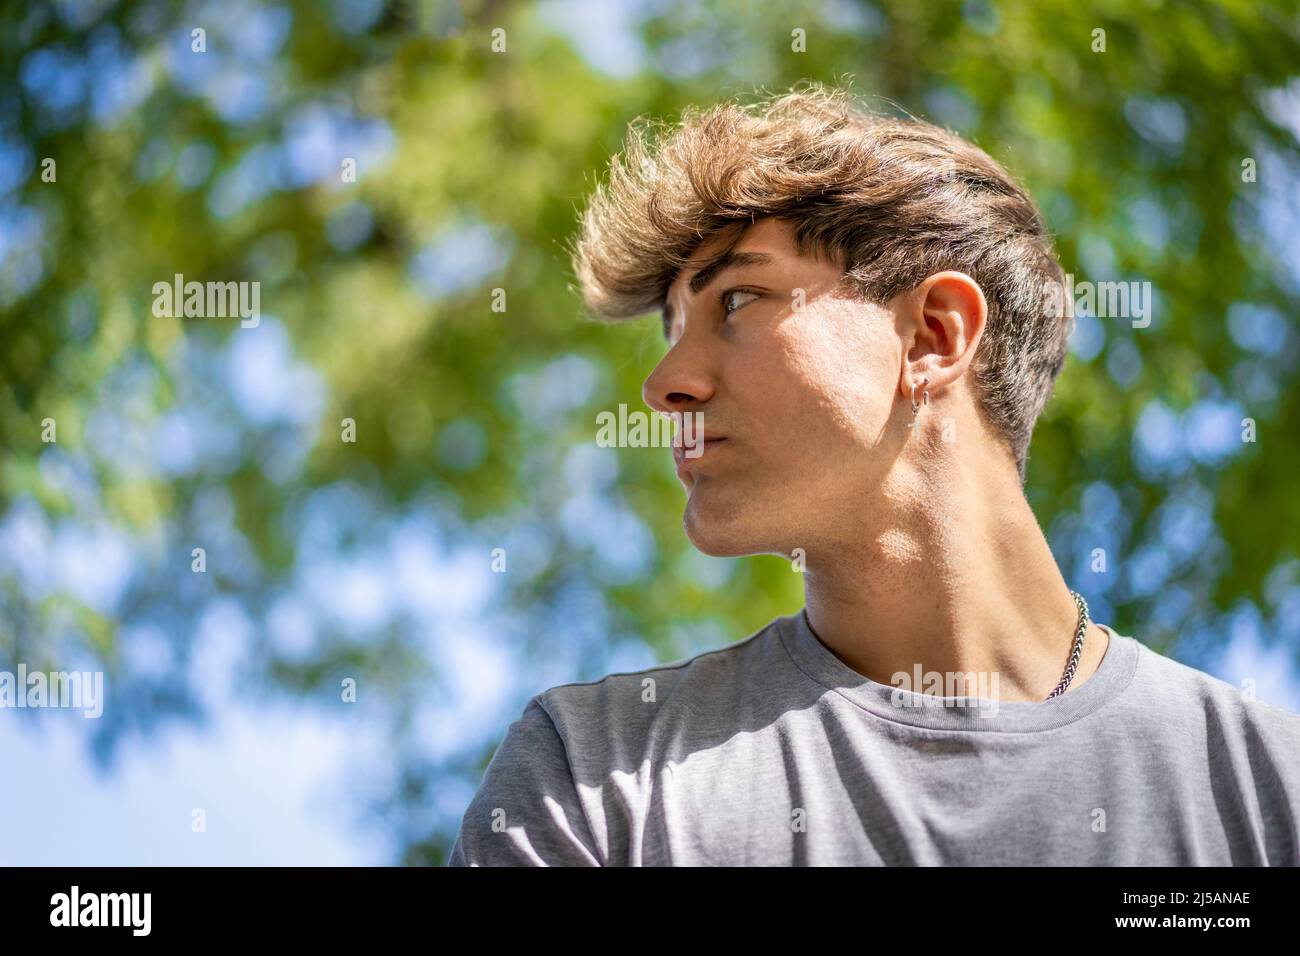 Confident young blonde man portrait, summer trees background. Copy space Stock Photo